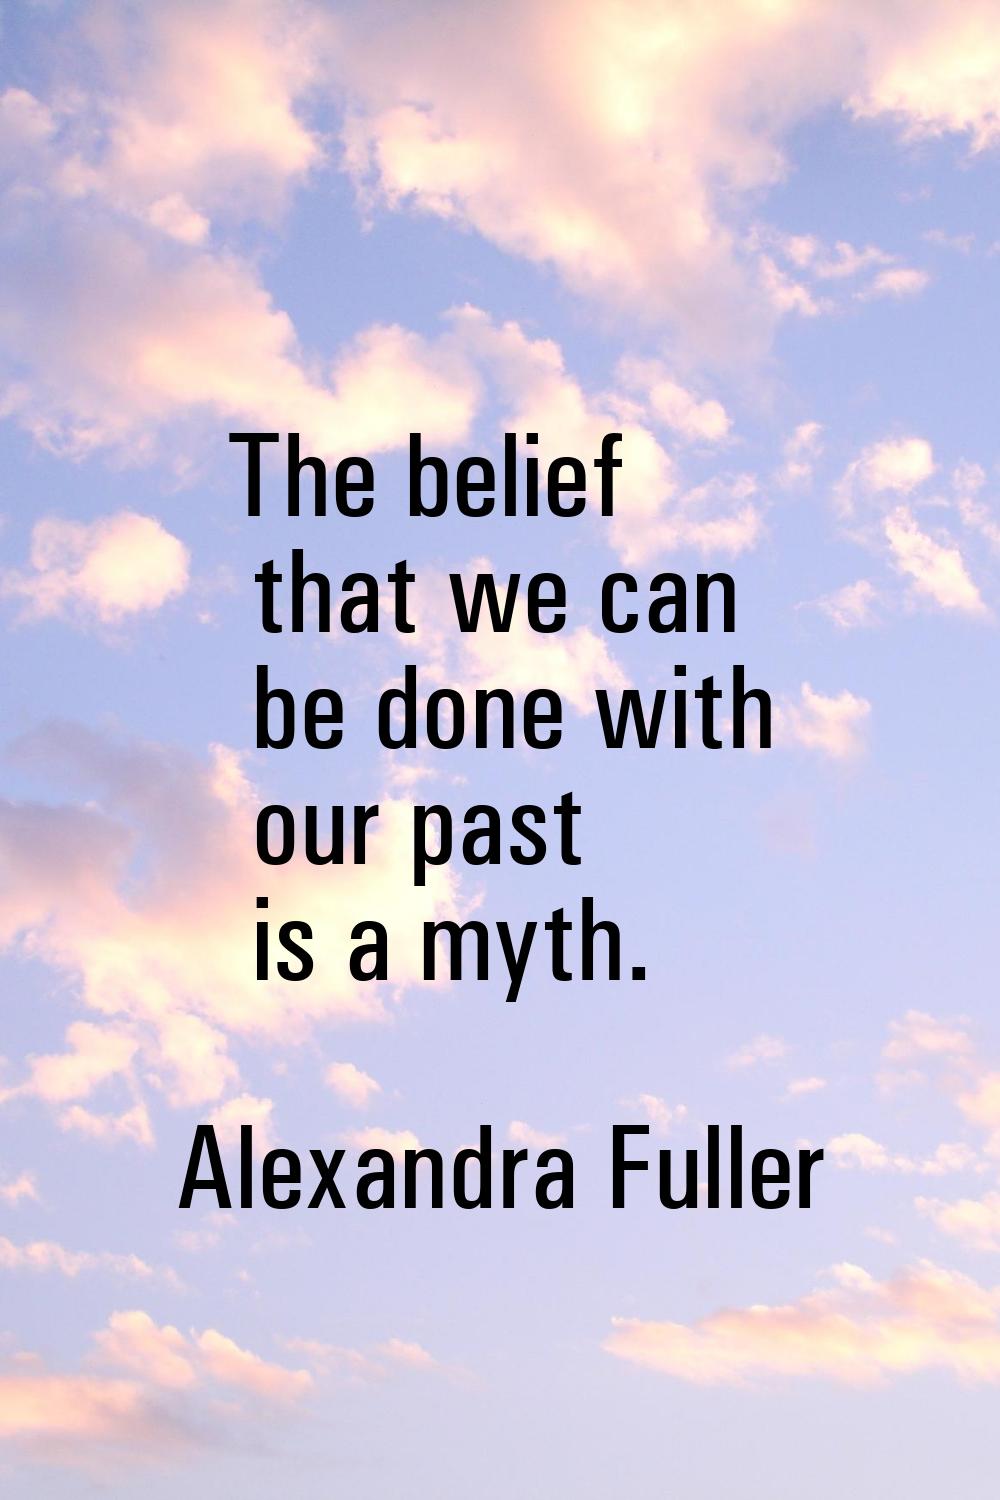 The belief that we can be done with our past is a myth.